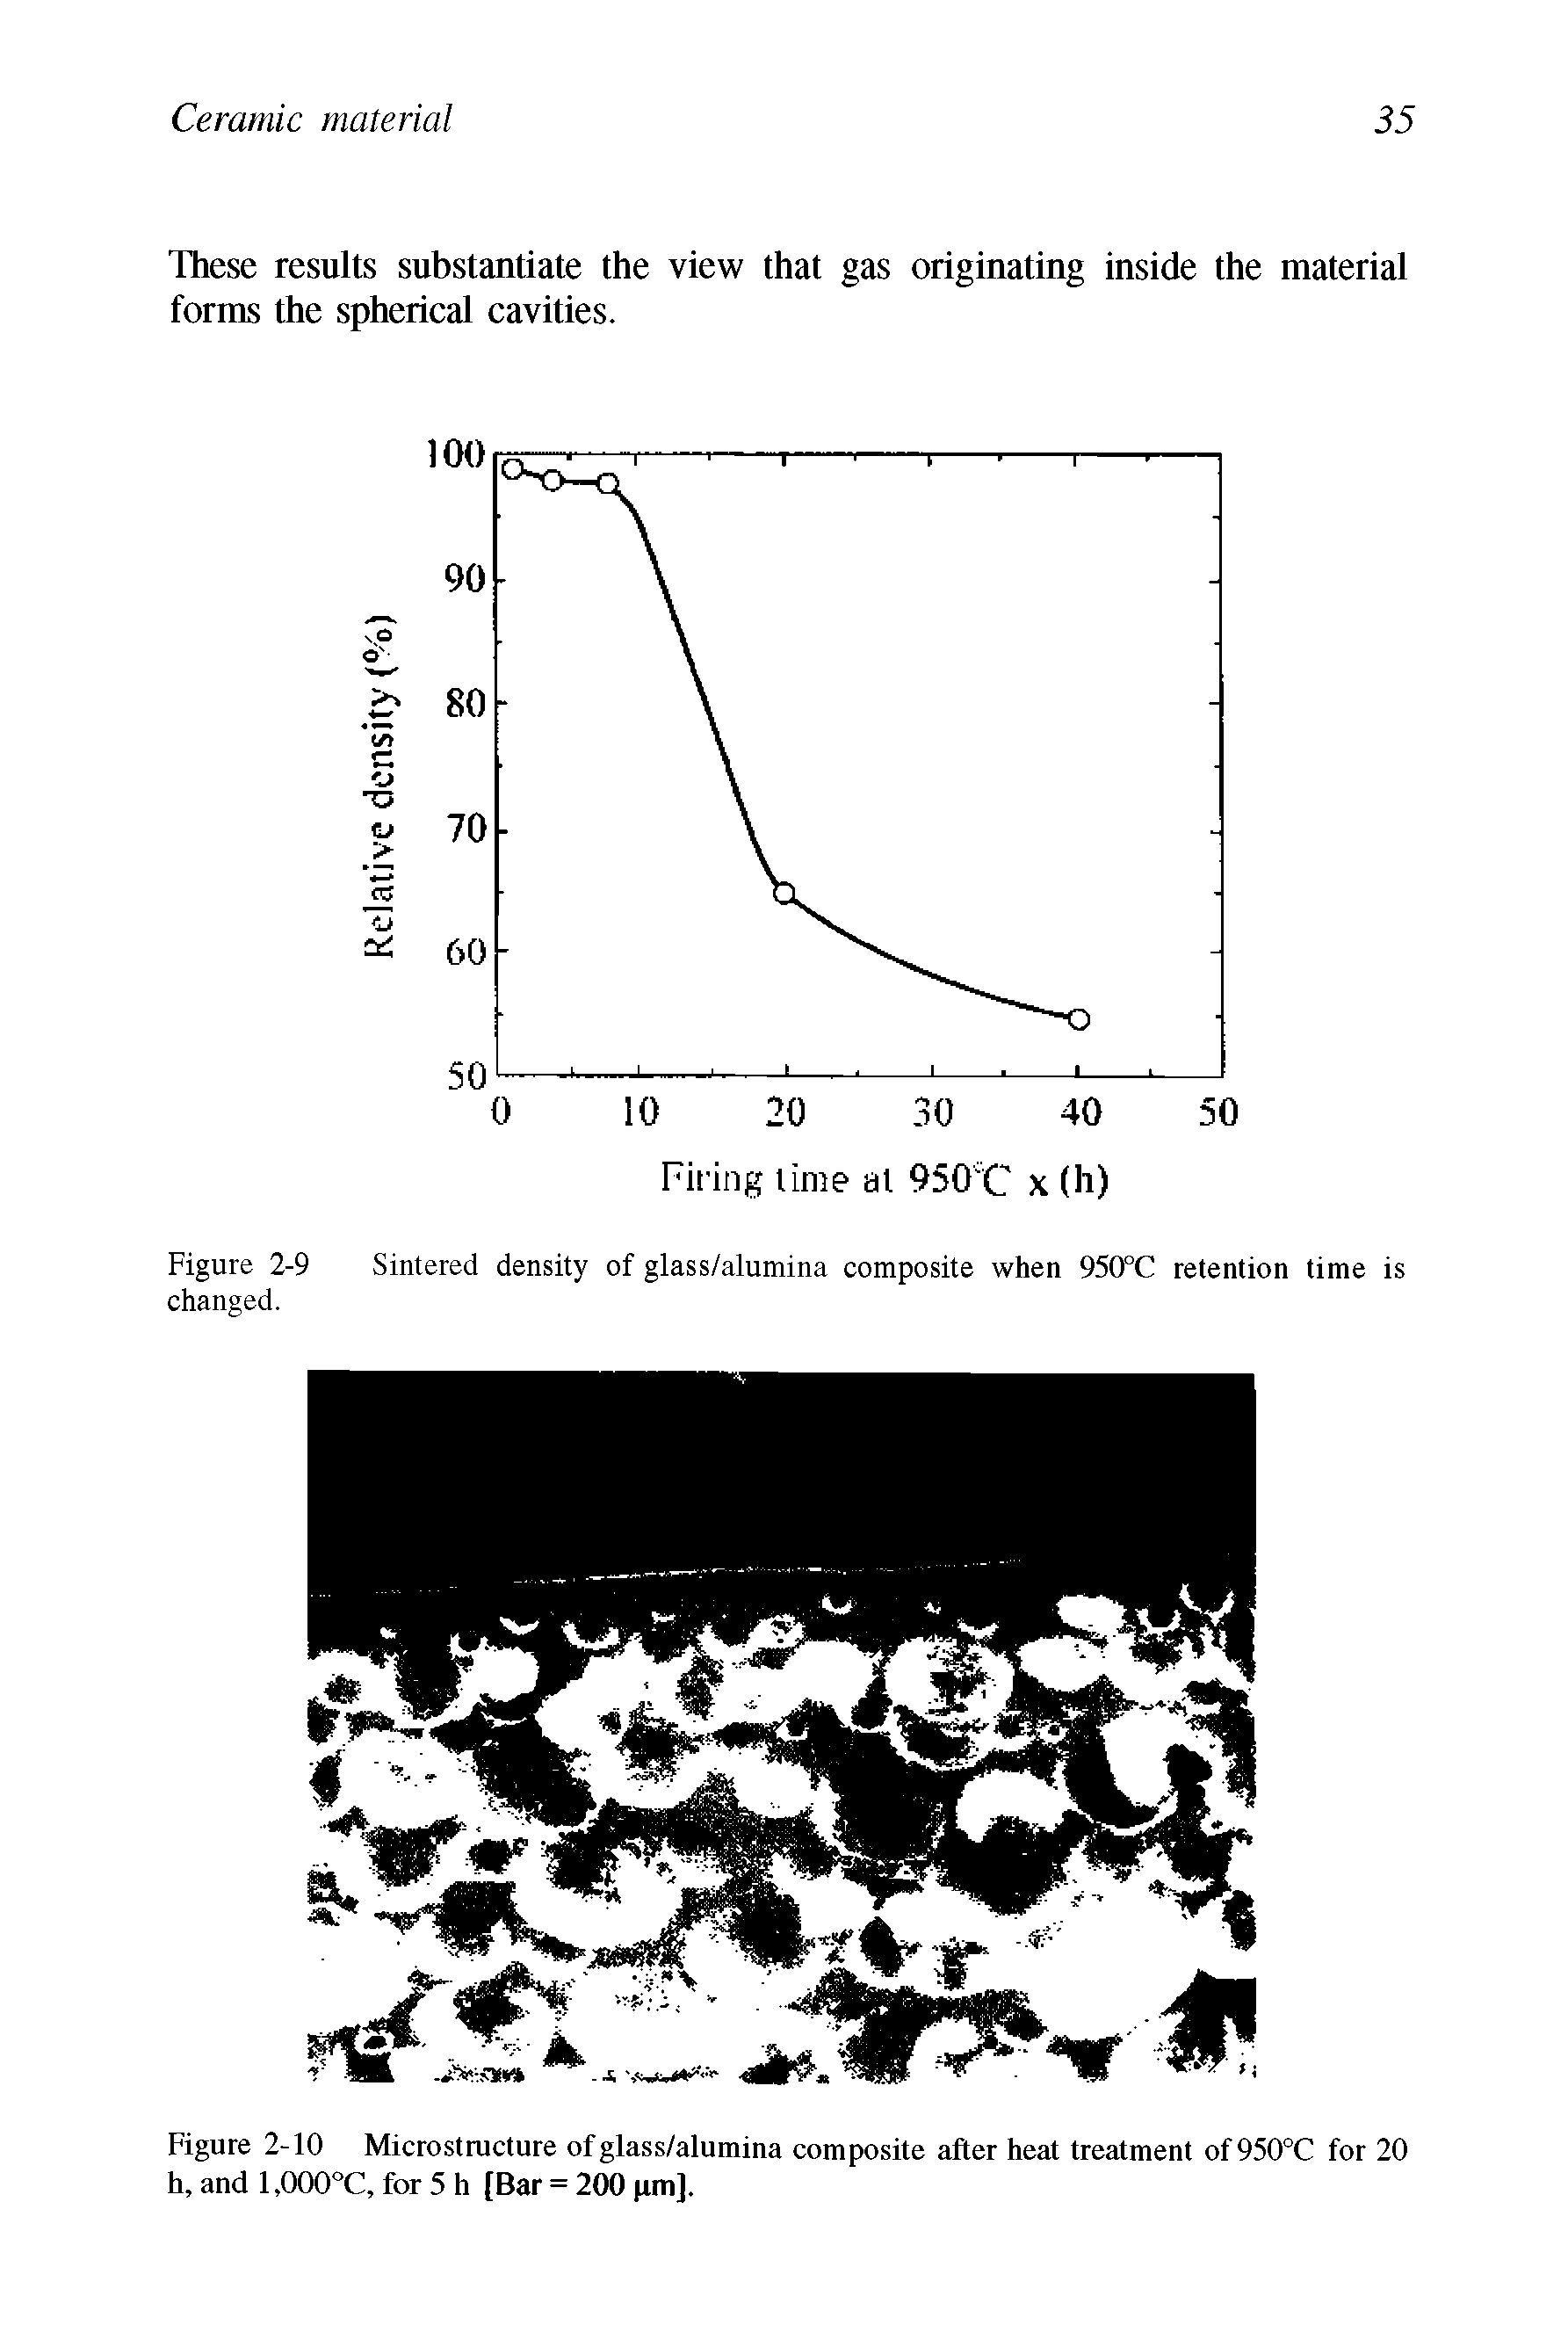 Figure 2-10 Microstructure of glass/alumina composite after heat treatment of950°C for 20 h, and 1,000°C, for 5 h [Bar = 200 pm].